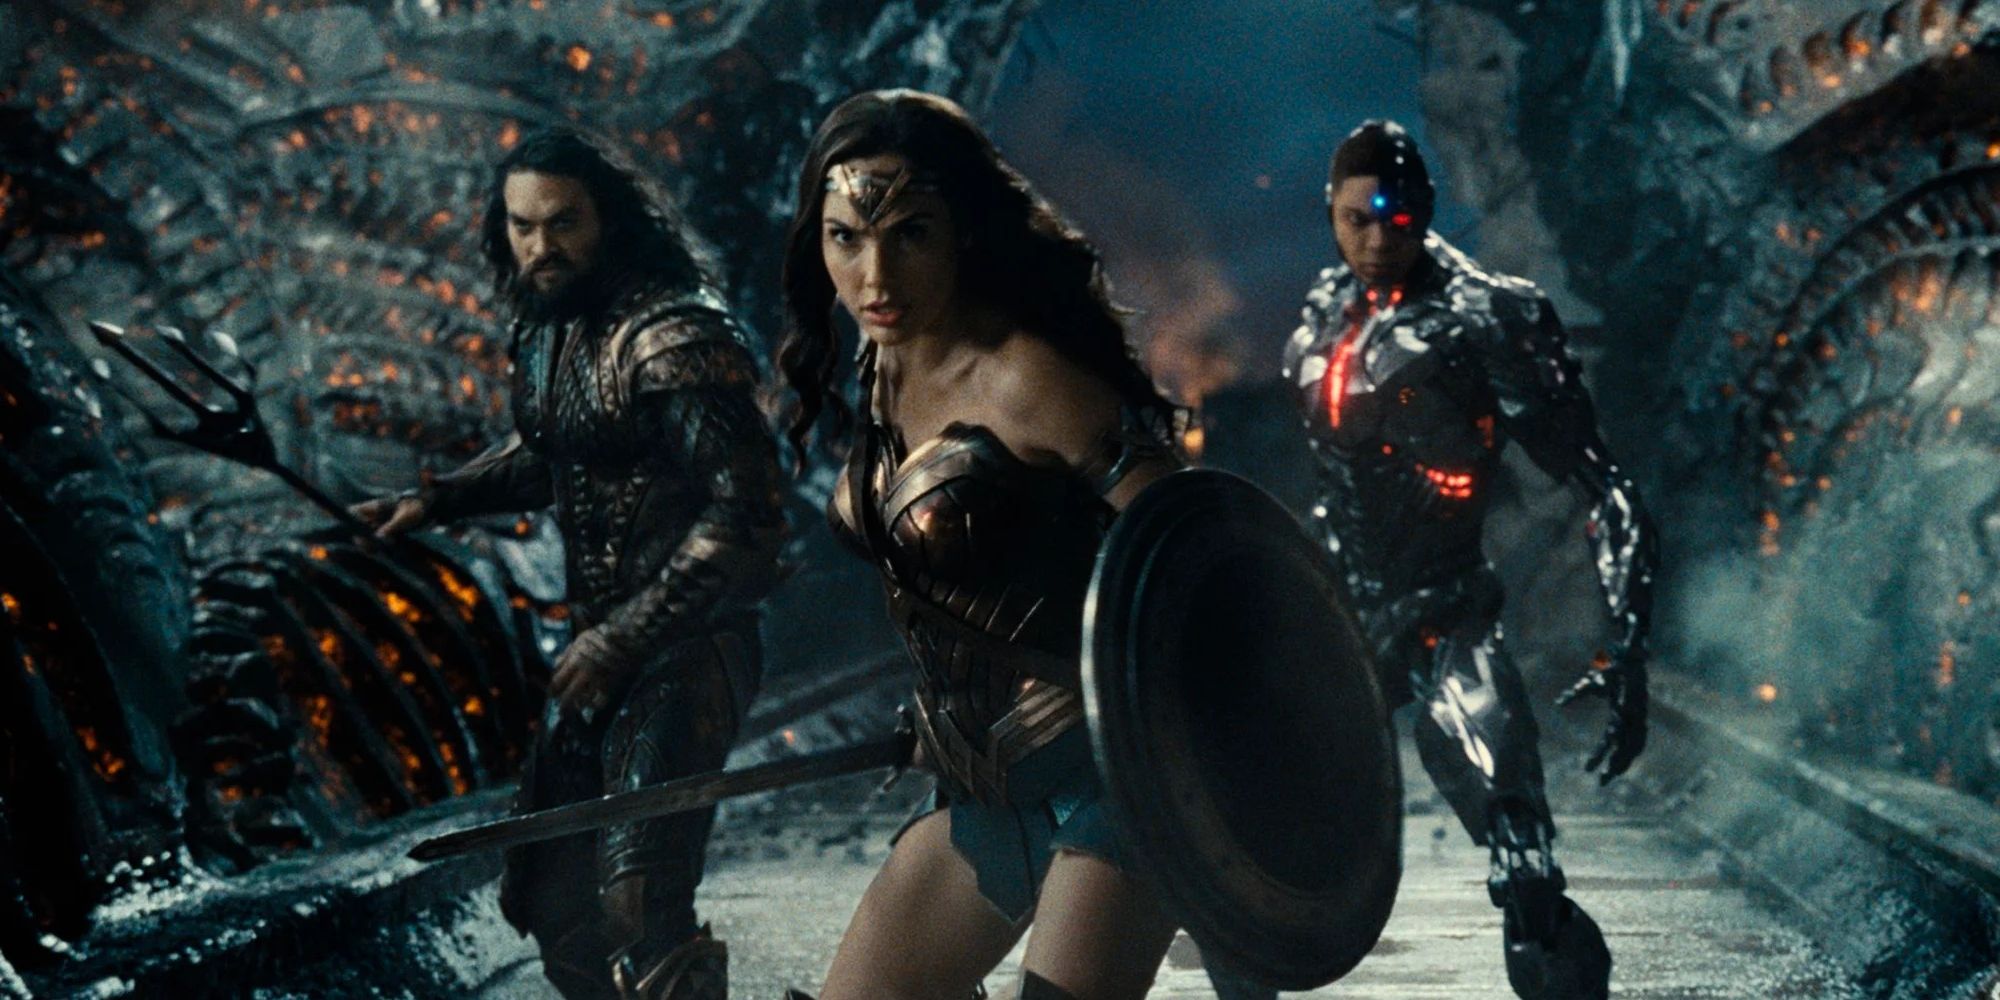 Aquaman, Wonder Woman and Cyborg in Zack Snyder's Justice League